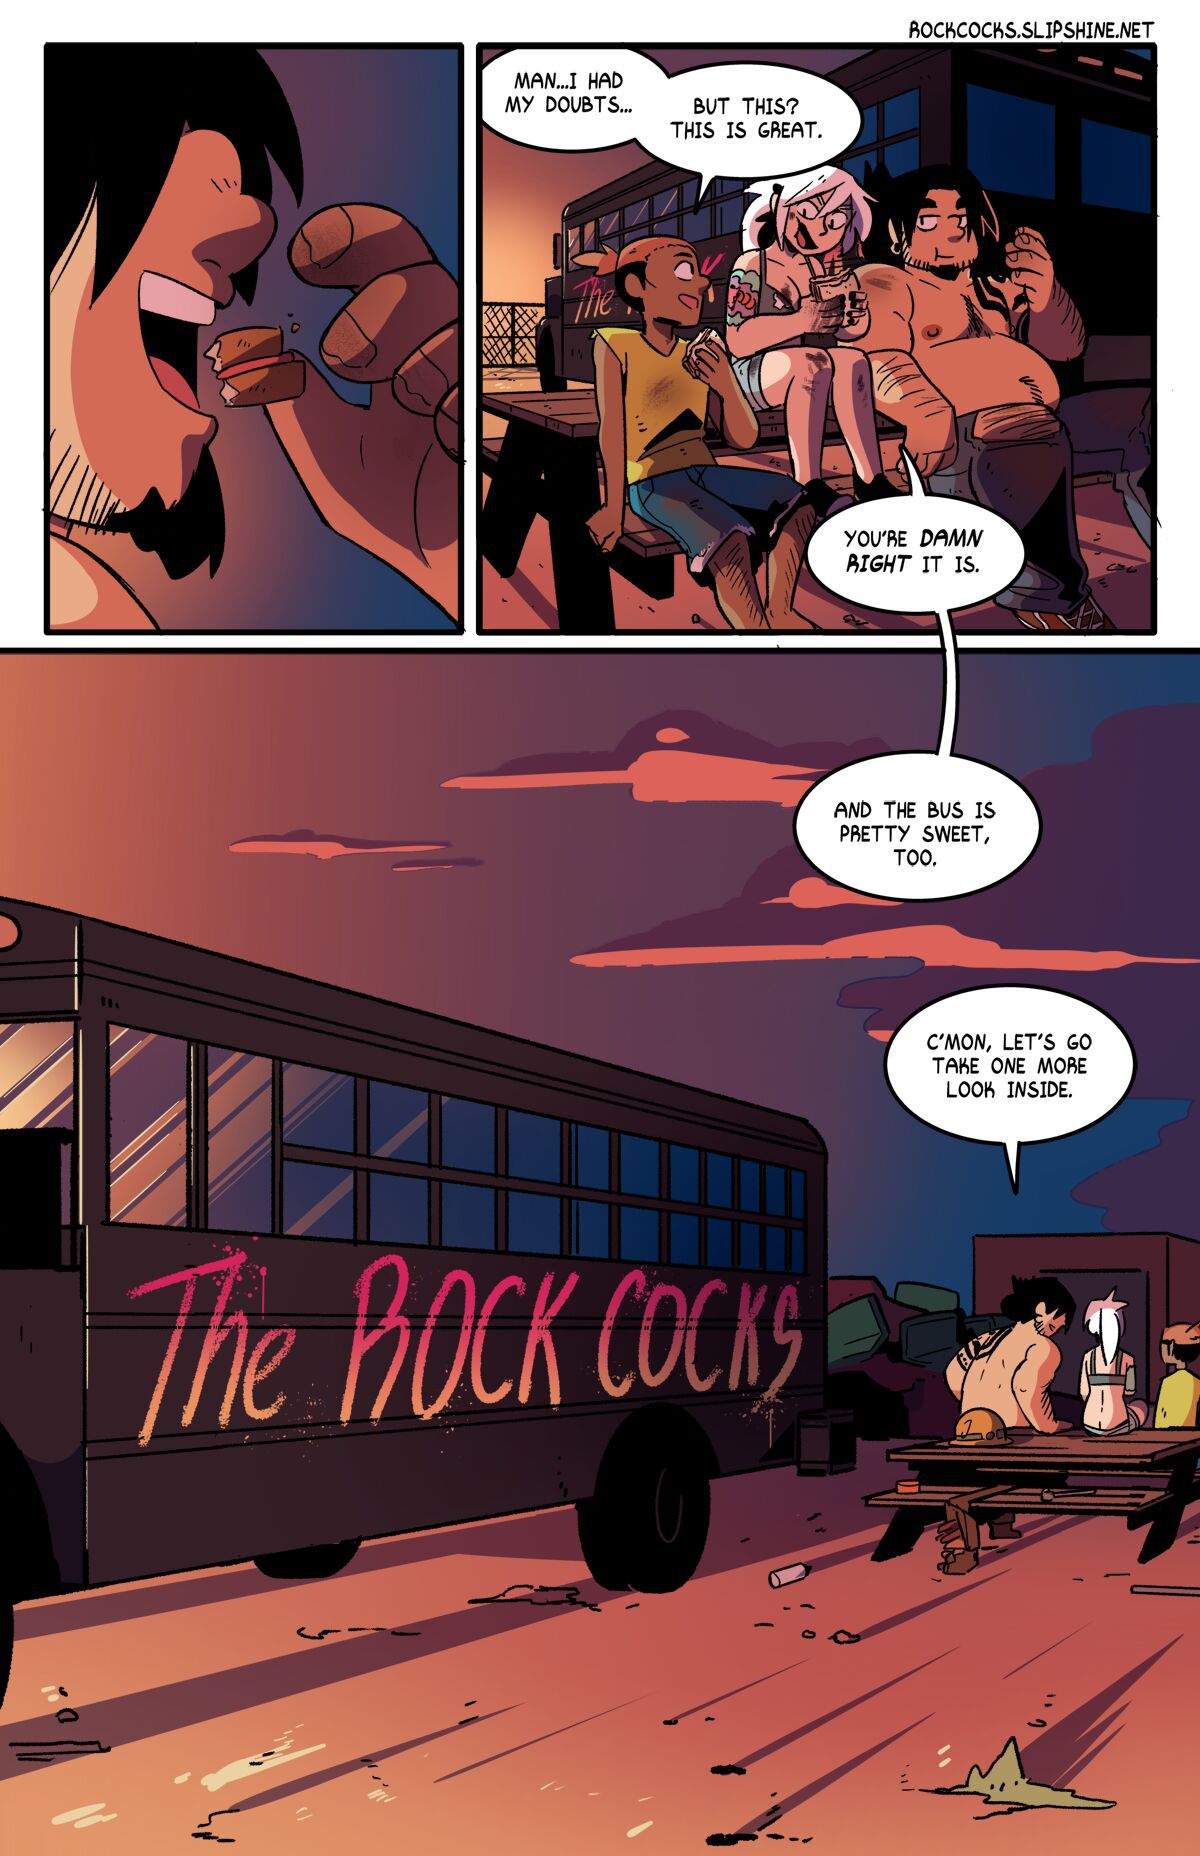 [Leslie Brown] The Rock Cocks ch. 1 - 14 [Ongoing] (HQ) 287